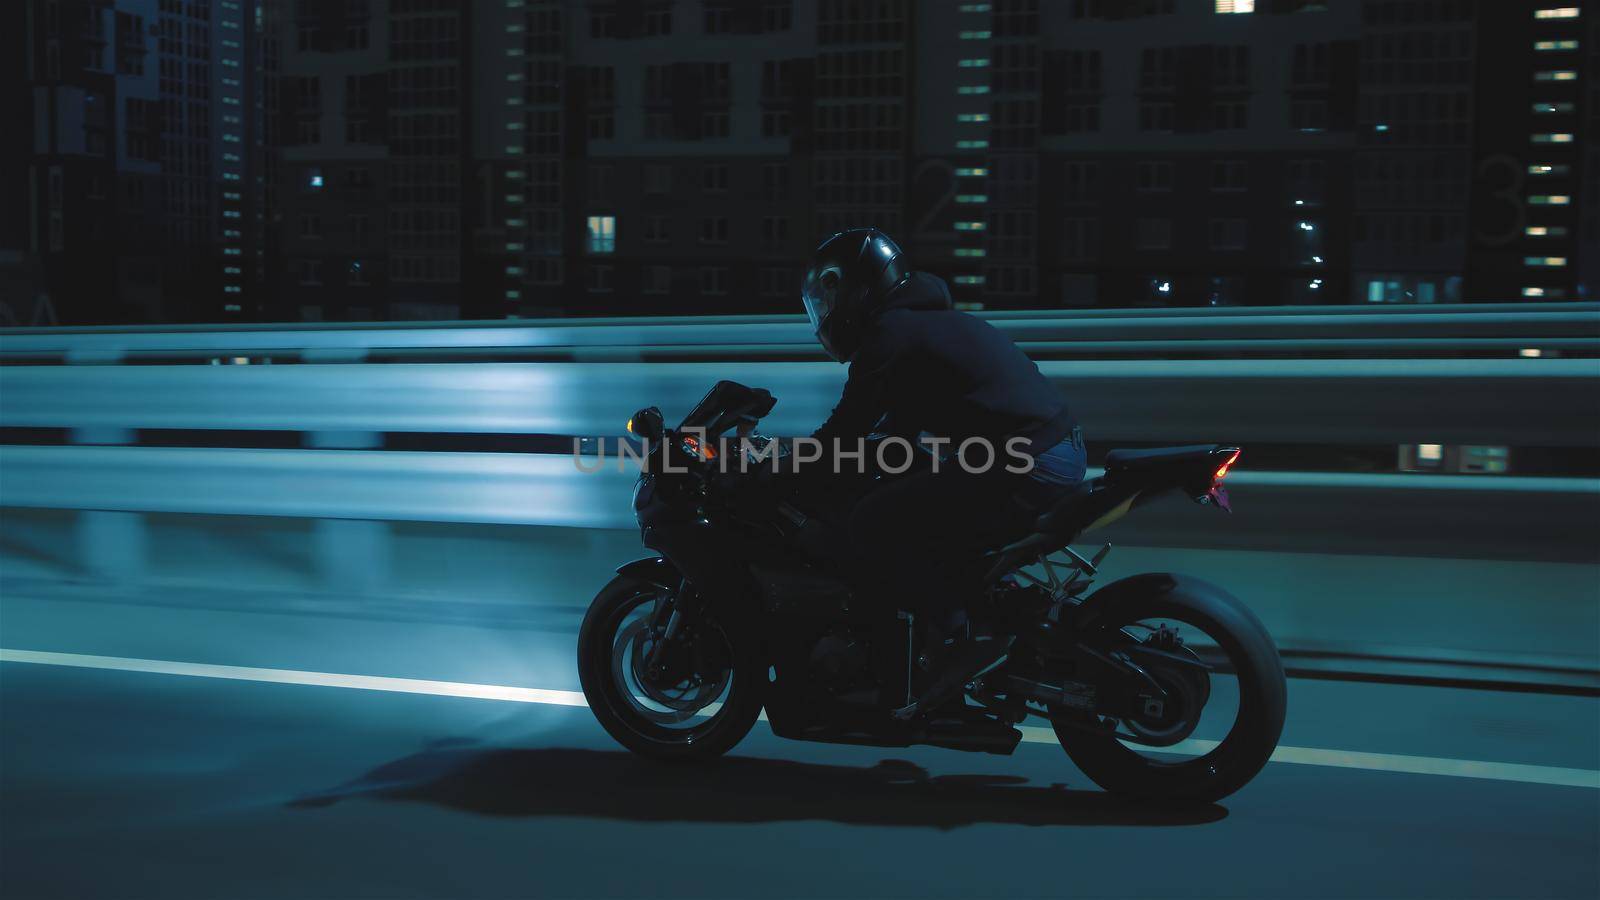 A man rides a sports motorcycle through the city at night in 4k